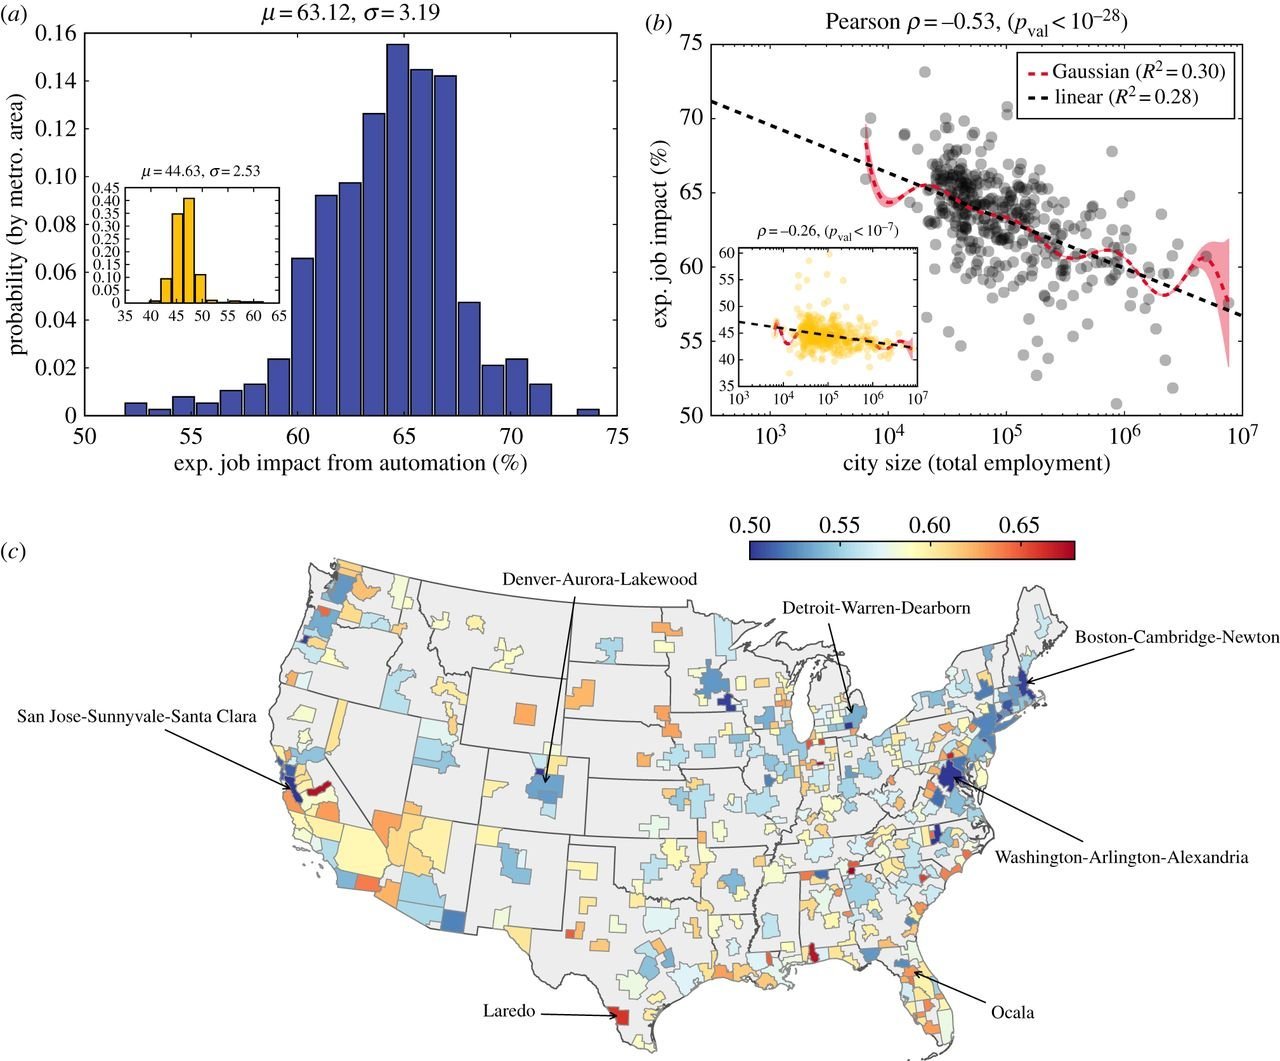 The impact of automation in US cities. (a) The distribution of expected job impact (Em) from automation across U.S. cities using estimates from Frey & Osborne. (Inset) The distribution using alternative estimates. (b) Expected job impact decreases logarithmically with city size using estimates from Frey & Osborne [12]. We provide the line of best fit (slope = − 3.215) with Pearson correlation to demonstrate significance (title). We also provide a Gaussian kernel regression model with its associated 95 percent confidence interval. (Inset) Decreased expected job impact with increased city size is again observed using alternative estimates (best fit line has slope −1.24, Pearson ρ = − 0.26, pval < 10−7). (c) A map of US metropolitan statistical areas colored according to expected job impact from automation. Source: Journal of The Royal Society Interface (2018). DOI: 10.1098/rsif.2017.0946 